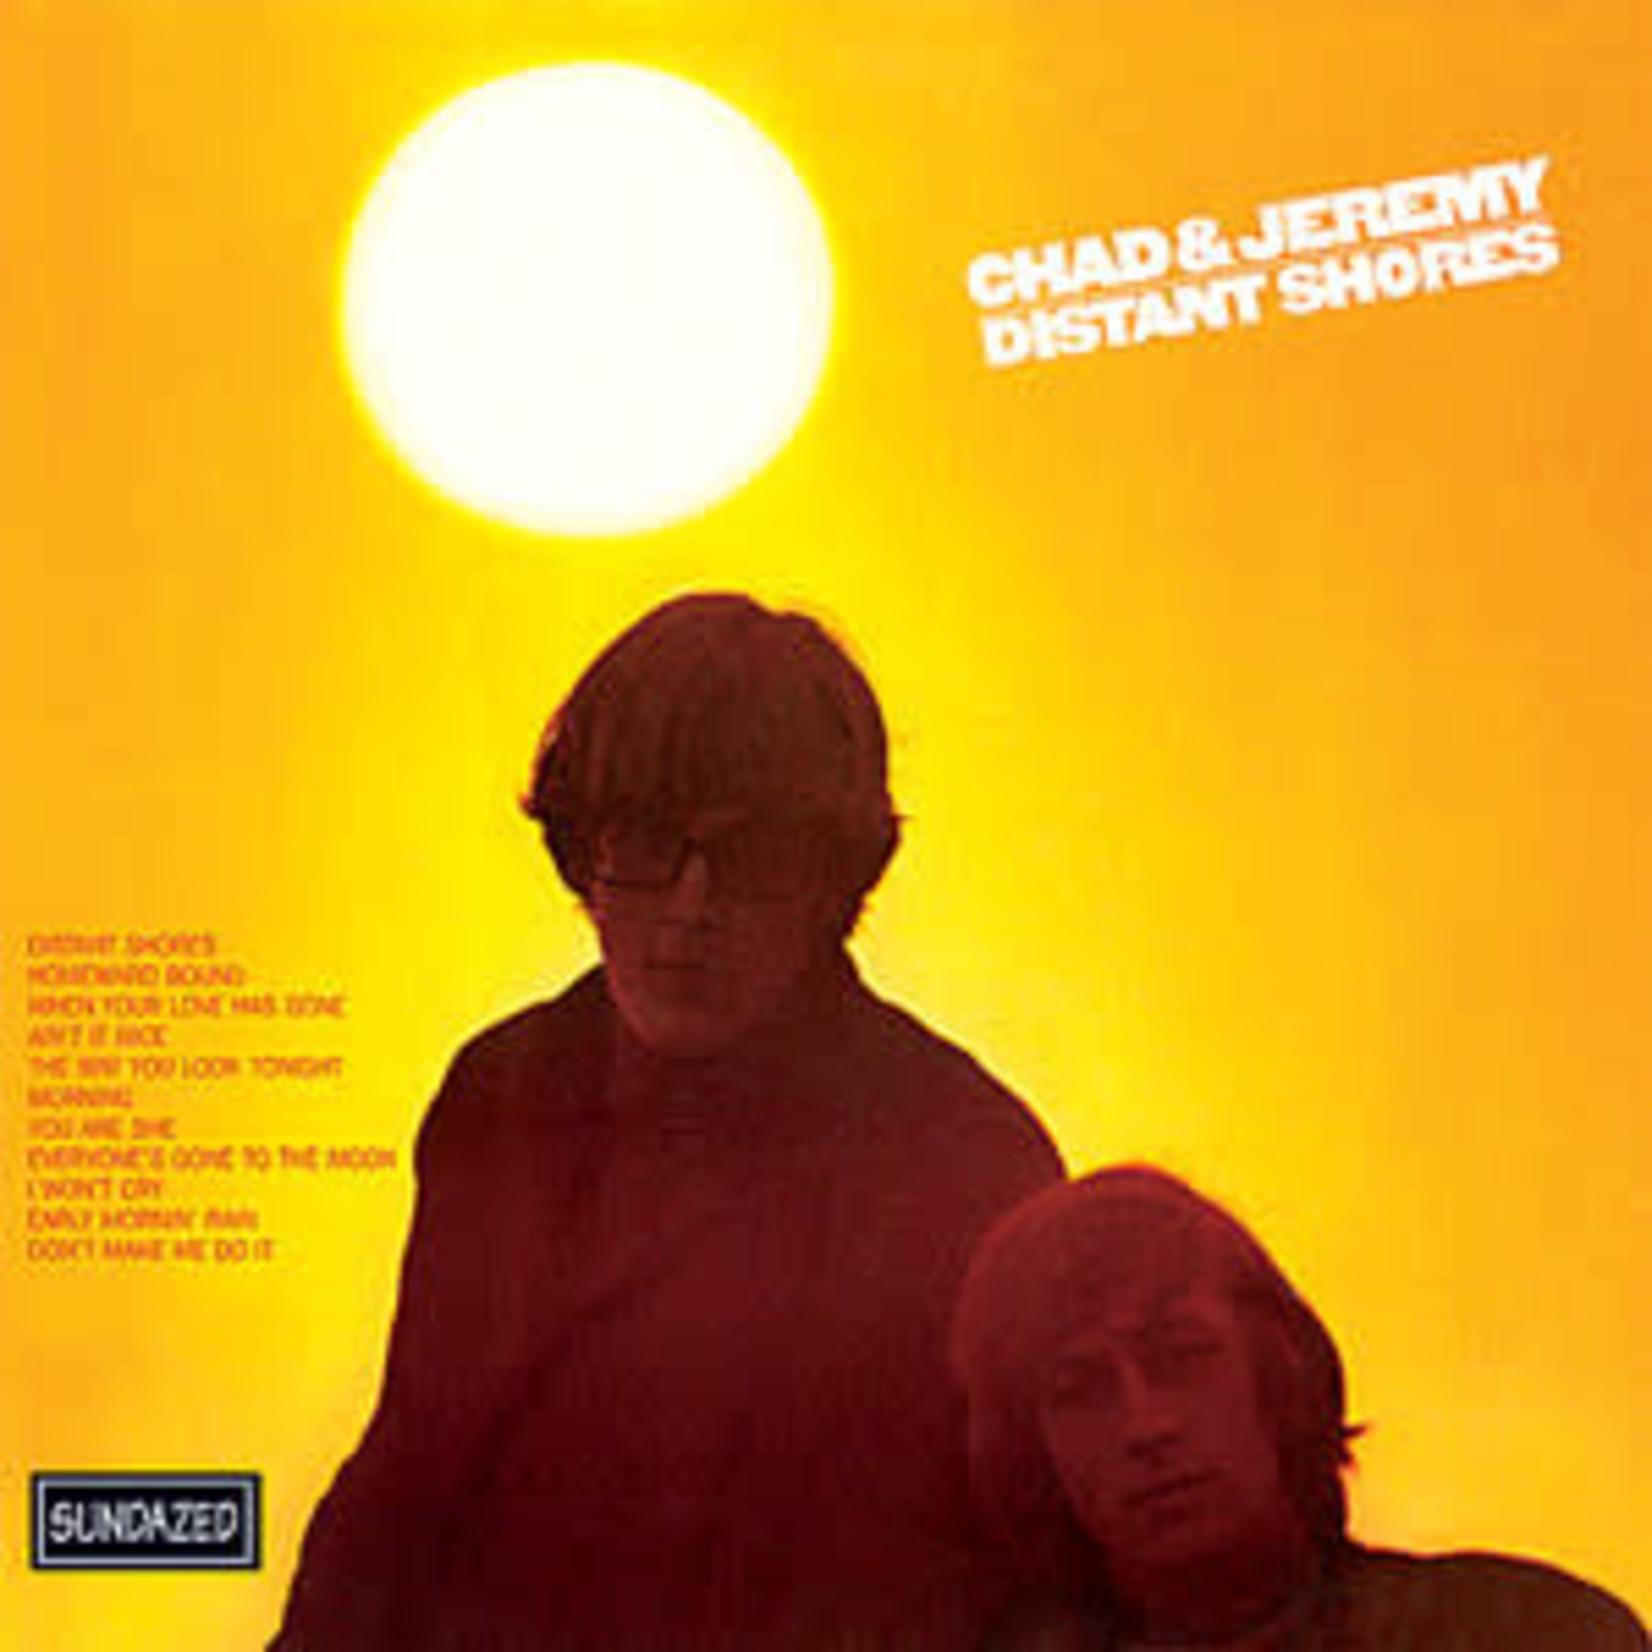 Chad & Jeremy - Distant Shores [CD]